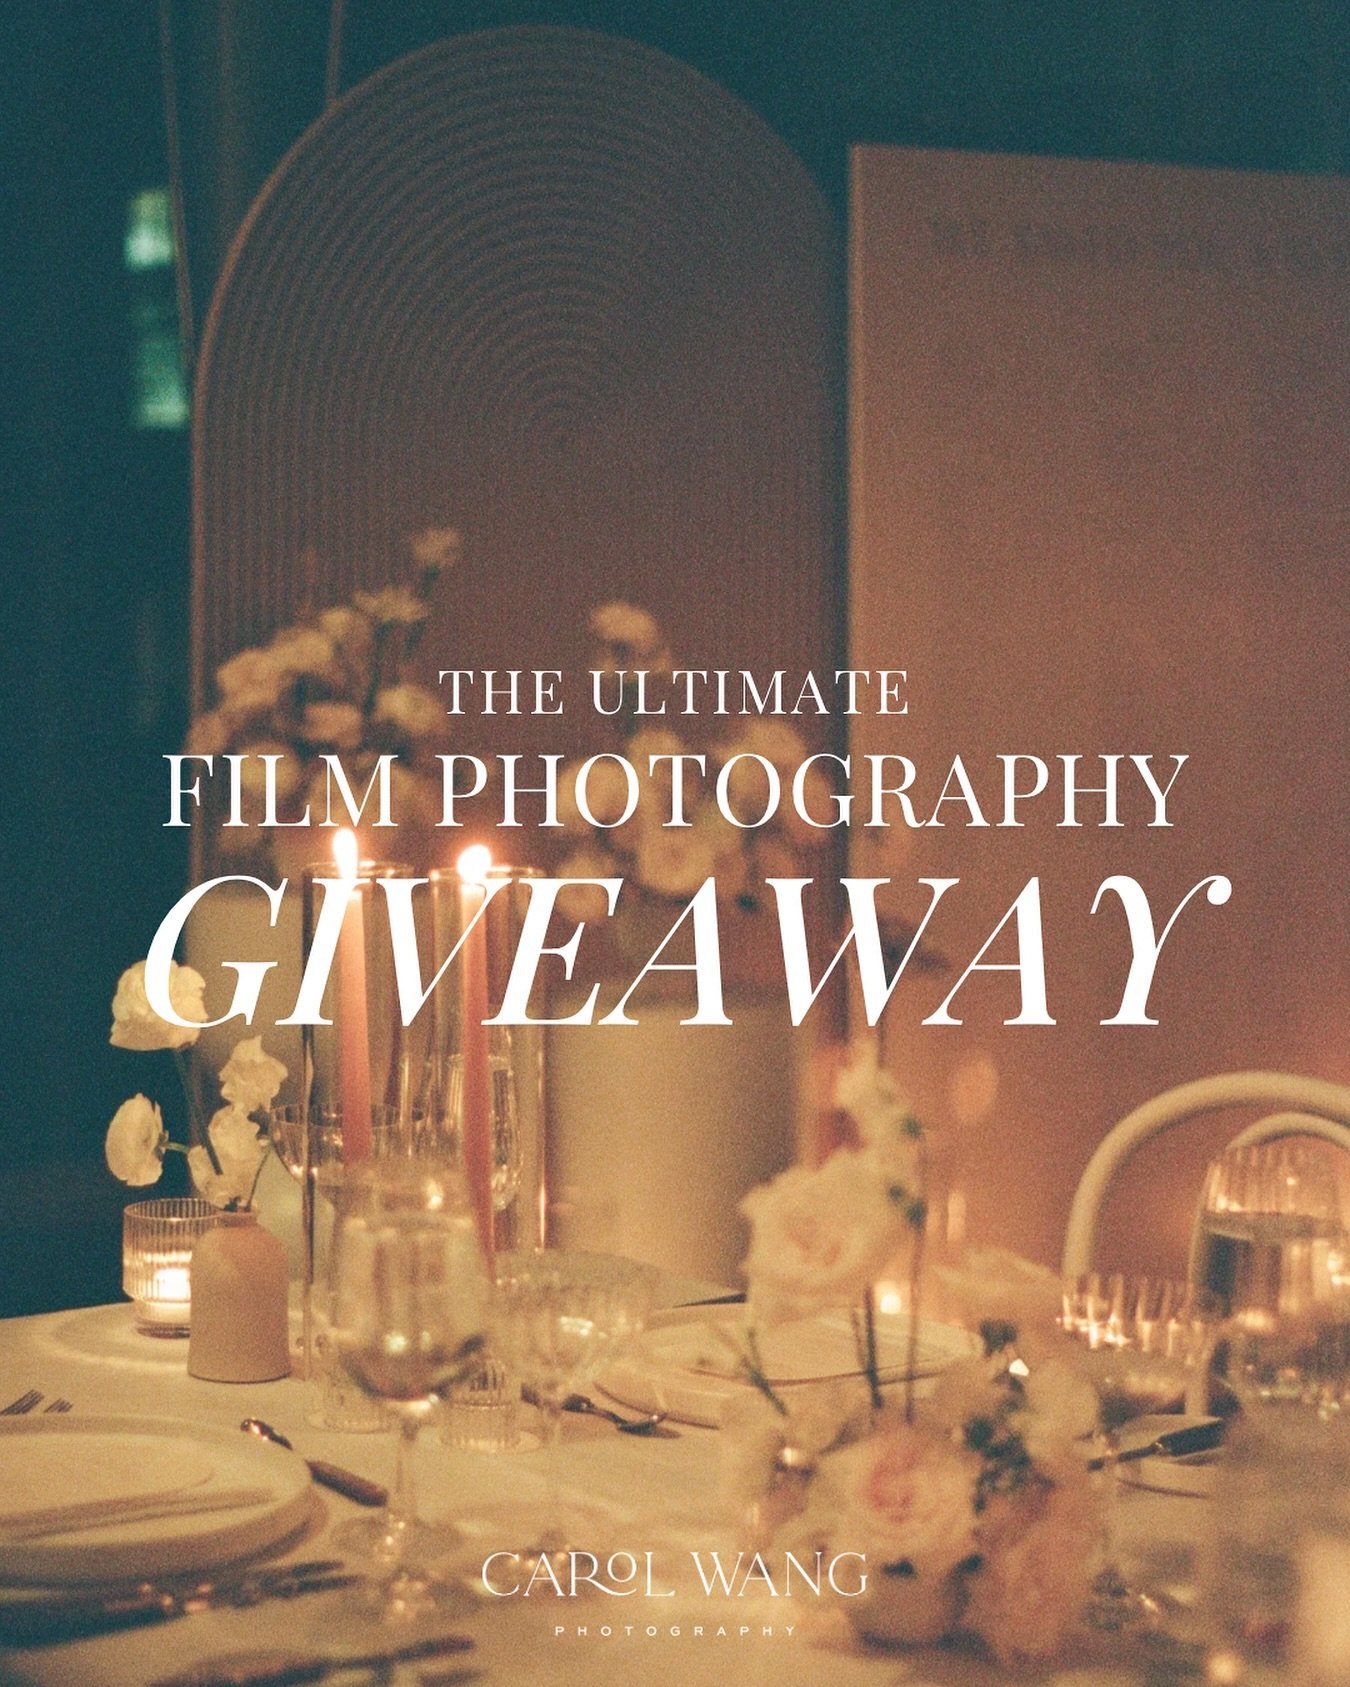 I&rsquo;m offering a FREE wedding photography package, shot exclusively on film! 📸✨ For those who appreciate the nostalgic charm and unique quality of film, this one&rsquo;s for you.

What it includes:
&bull; 8-hour wedding photography coverage shot